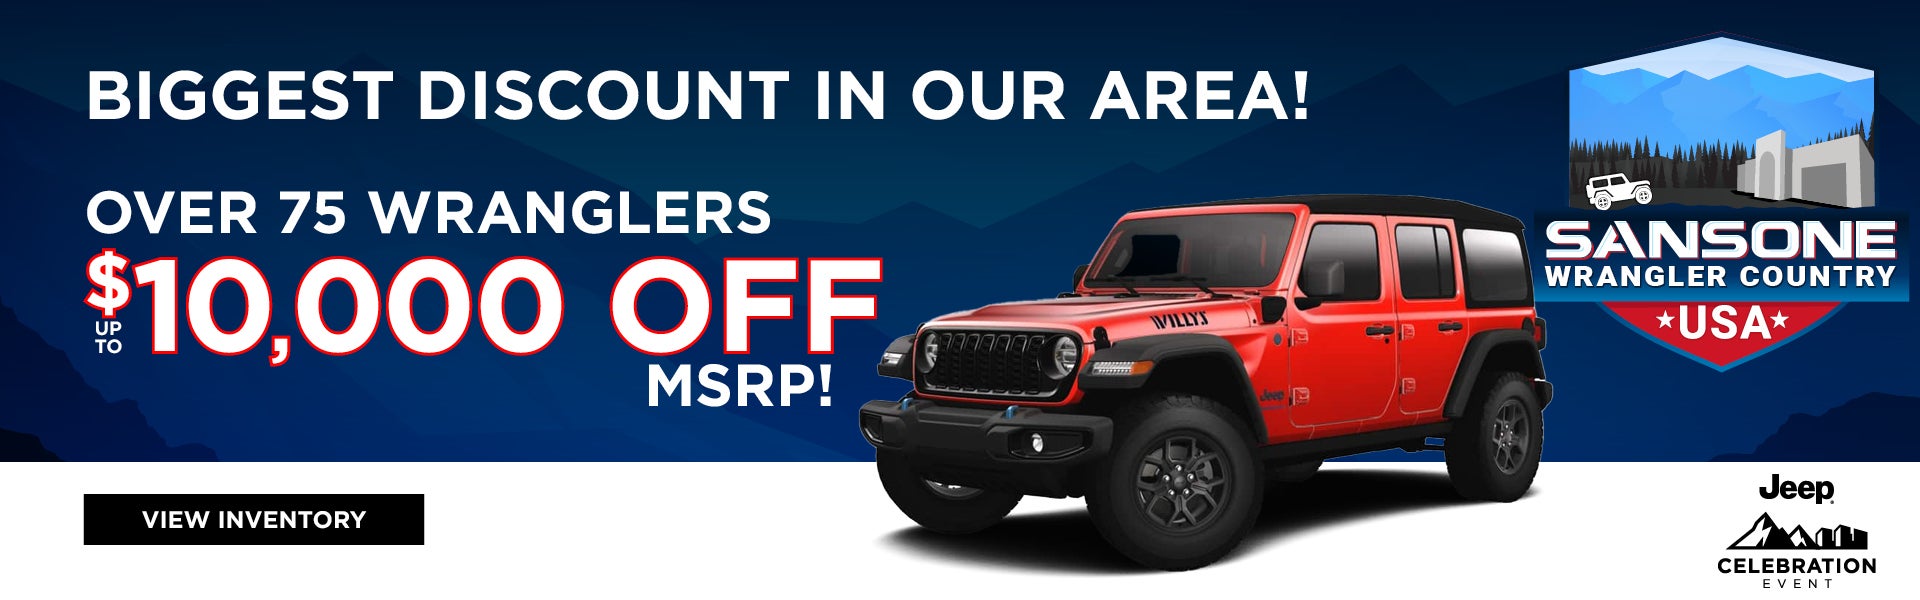 over 75 wranglers $10,000 off msrp